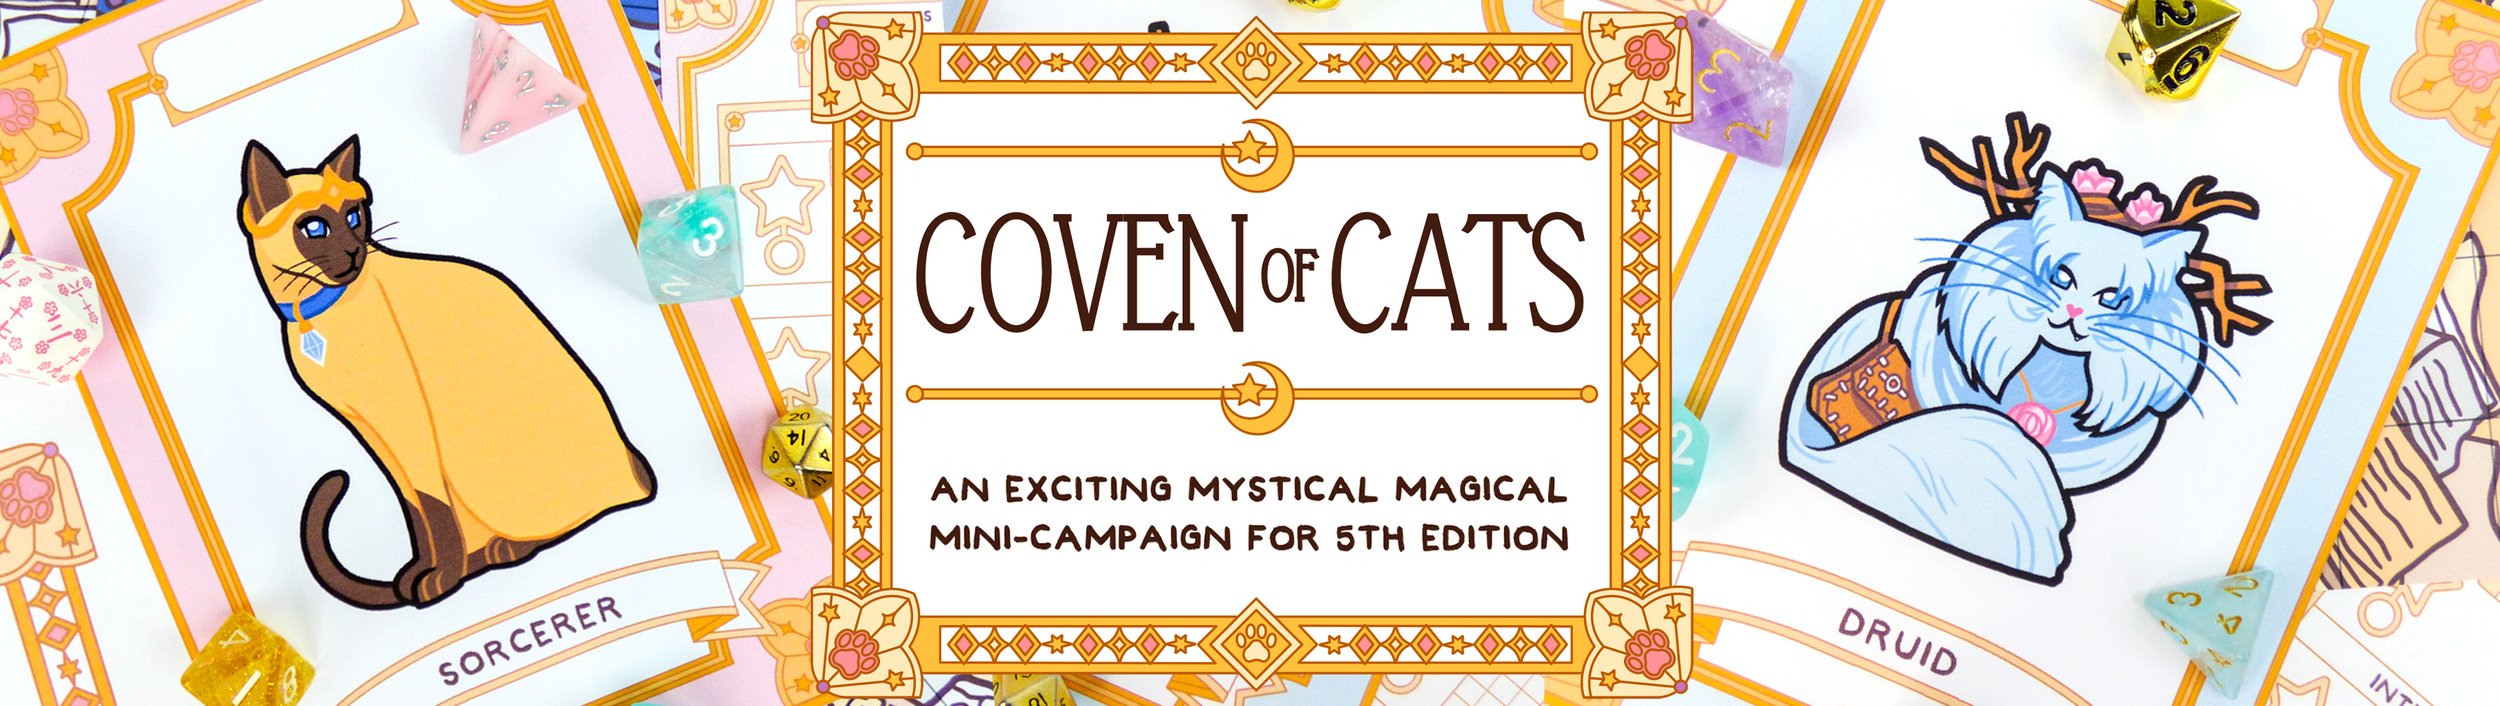 COVEN OF CATS BANNER AD 4.jpg